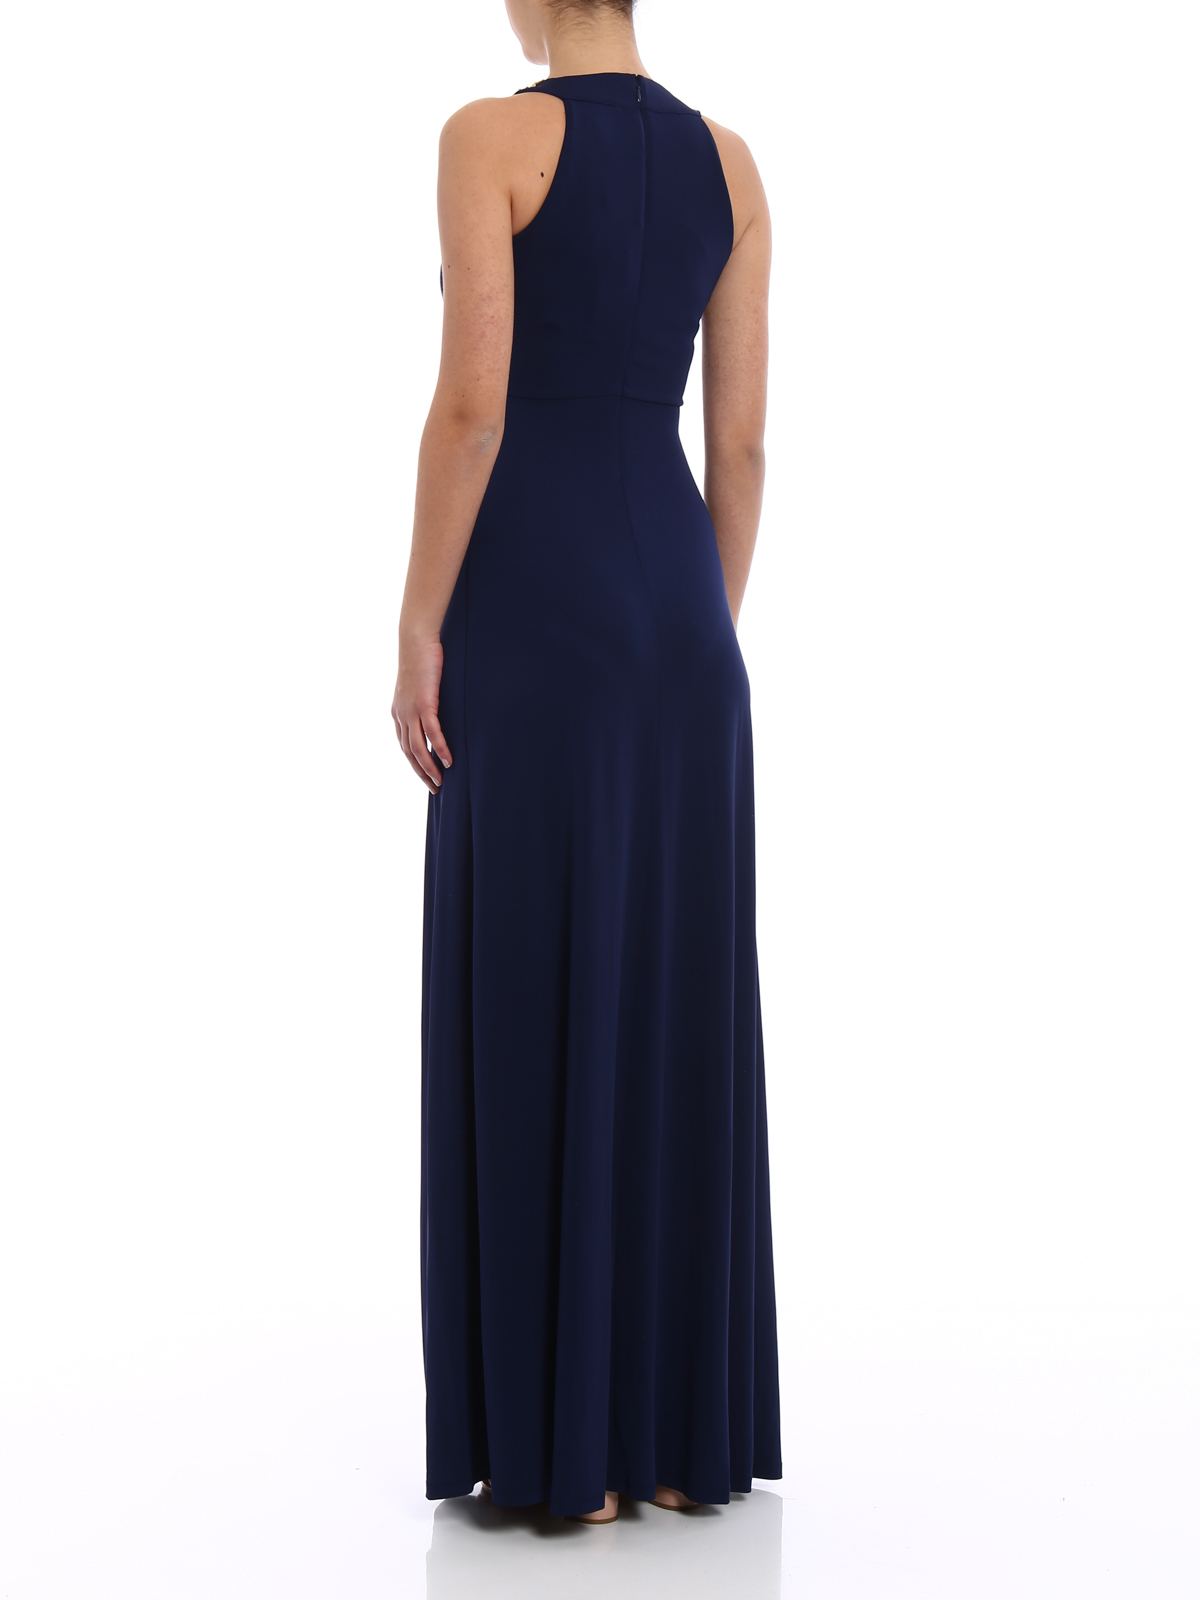 Michael Kors Pleated Tank Maxi Dress in Navy  UFO No More